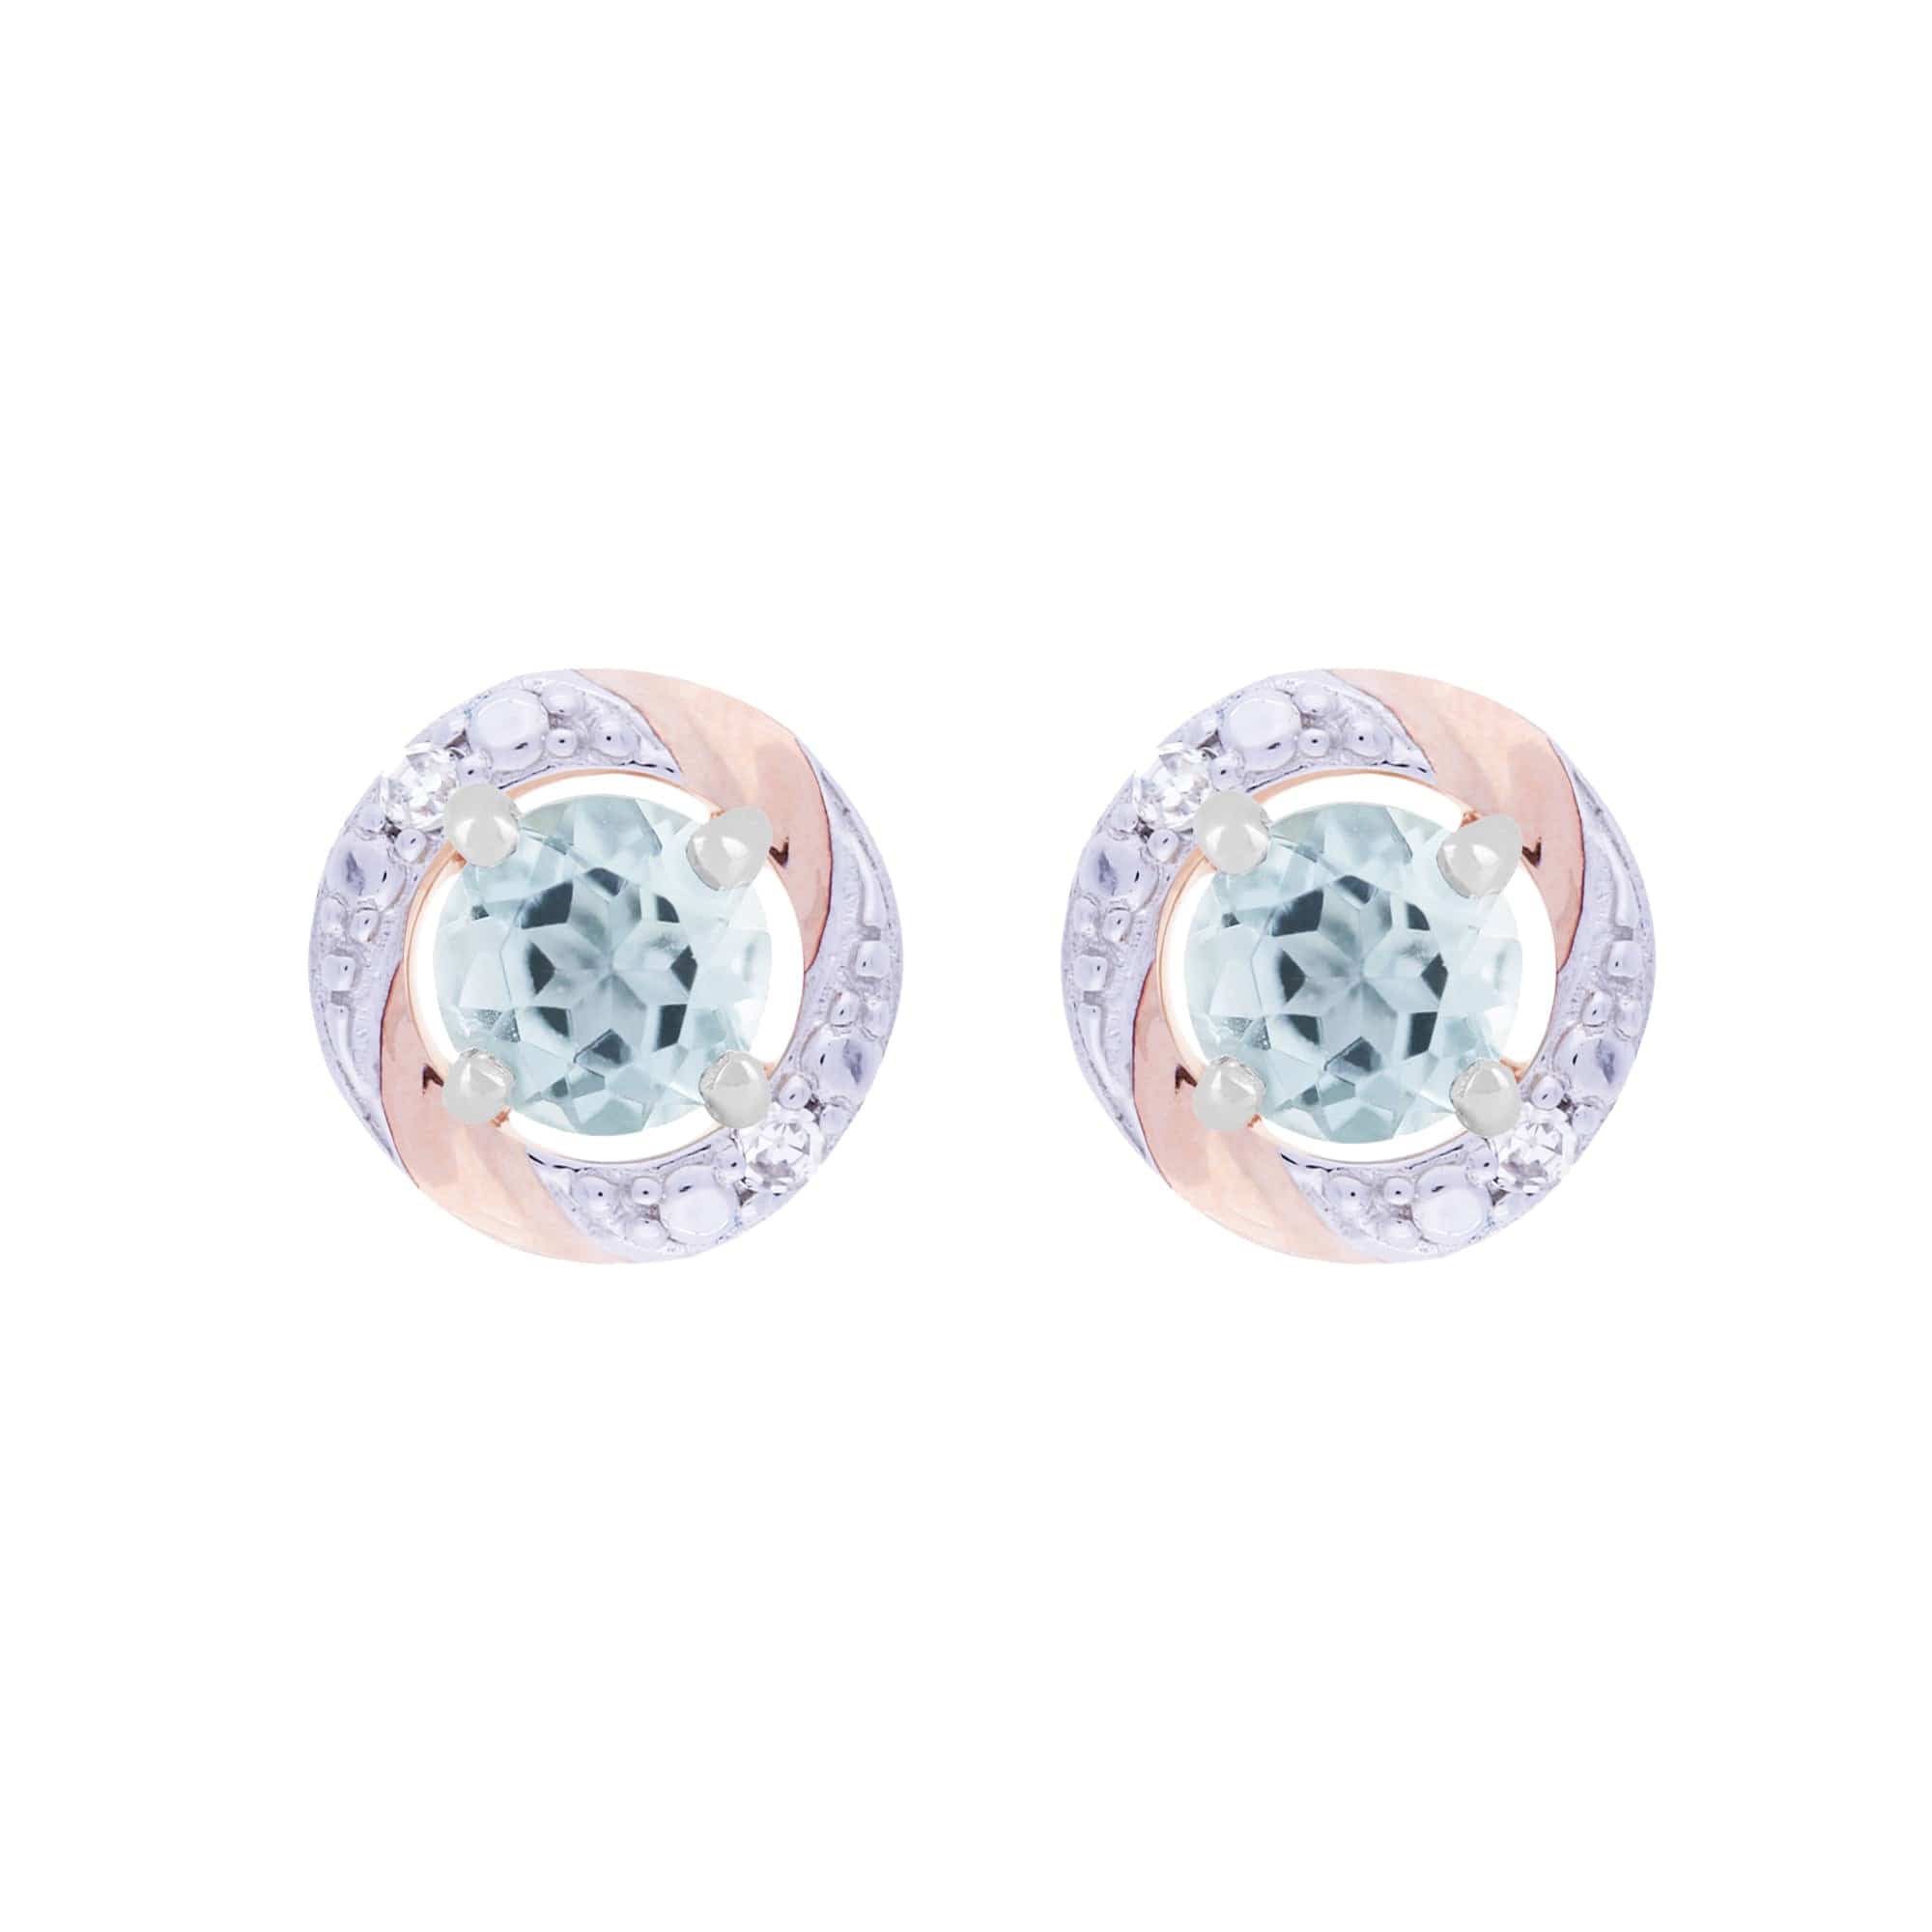 22526-191E0378019 Classic Round Aquamarine Stud Earrings with Detachable Diamond Round Earrings Jacket Set in 9ct Gold 1